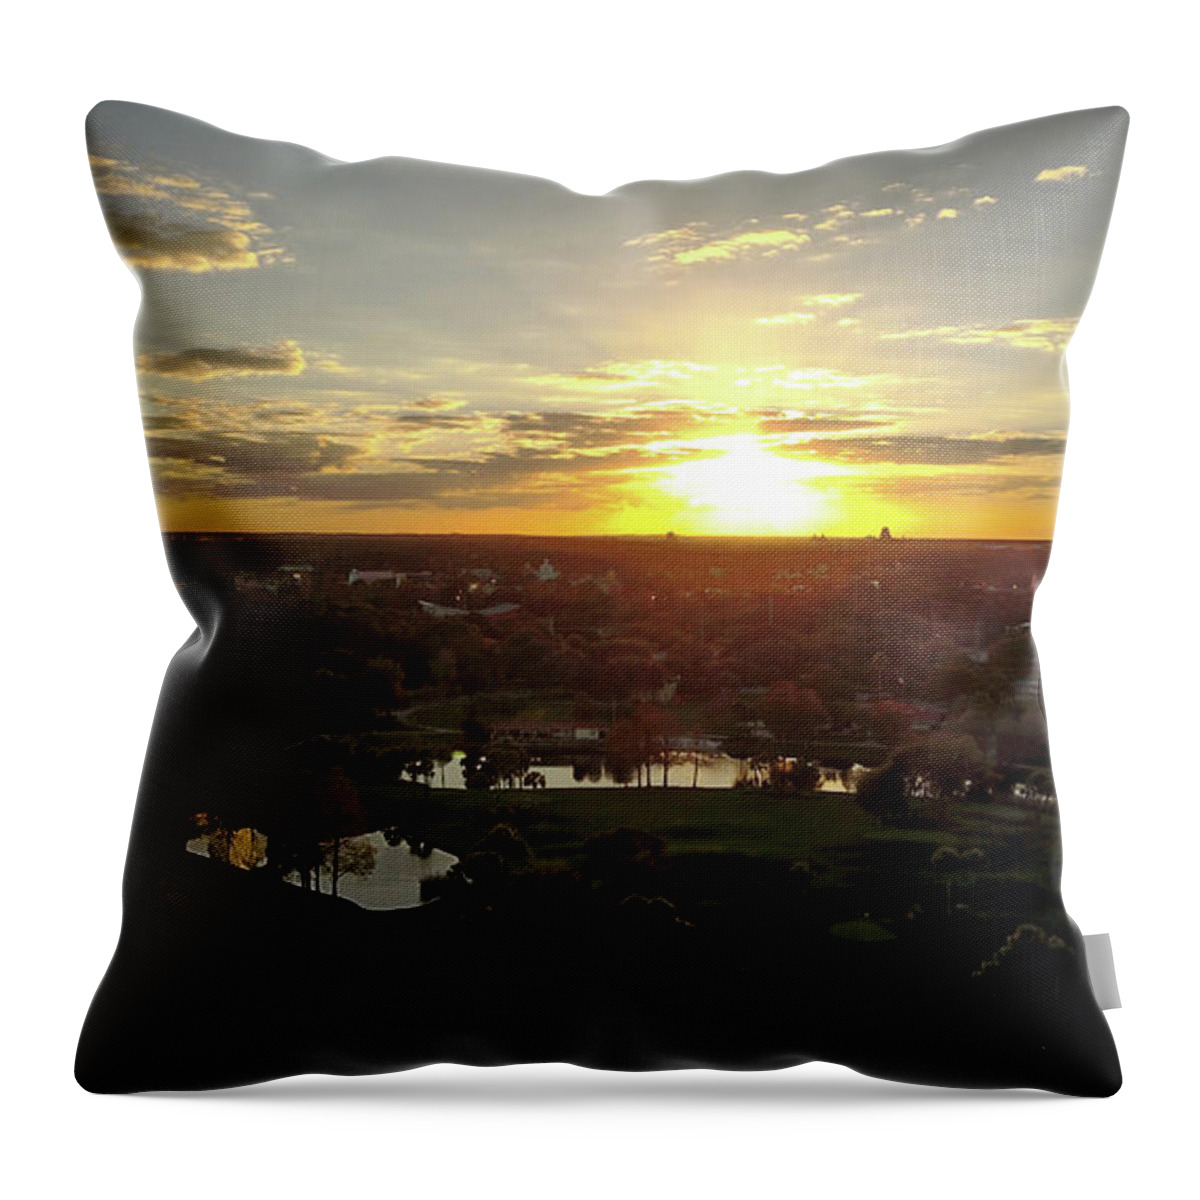 Disney Throw Pillow featuring the photograph Disney Sunset by Michael Albright